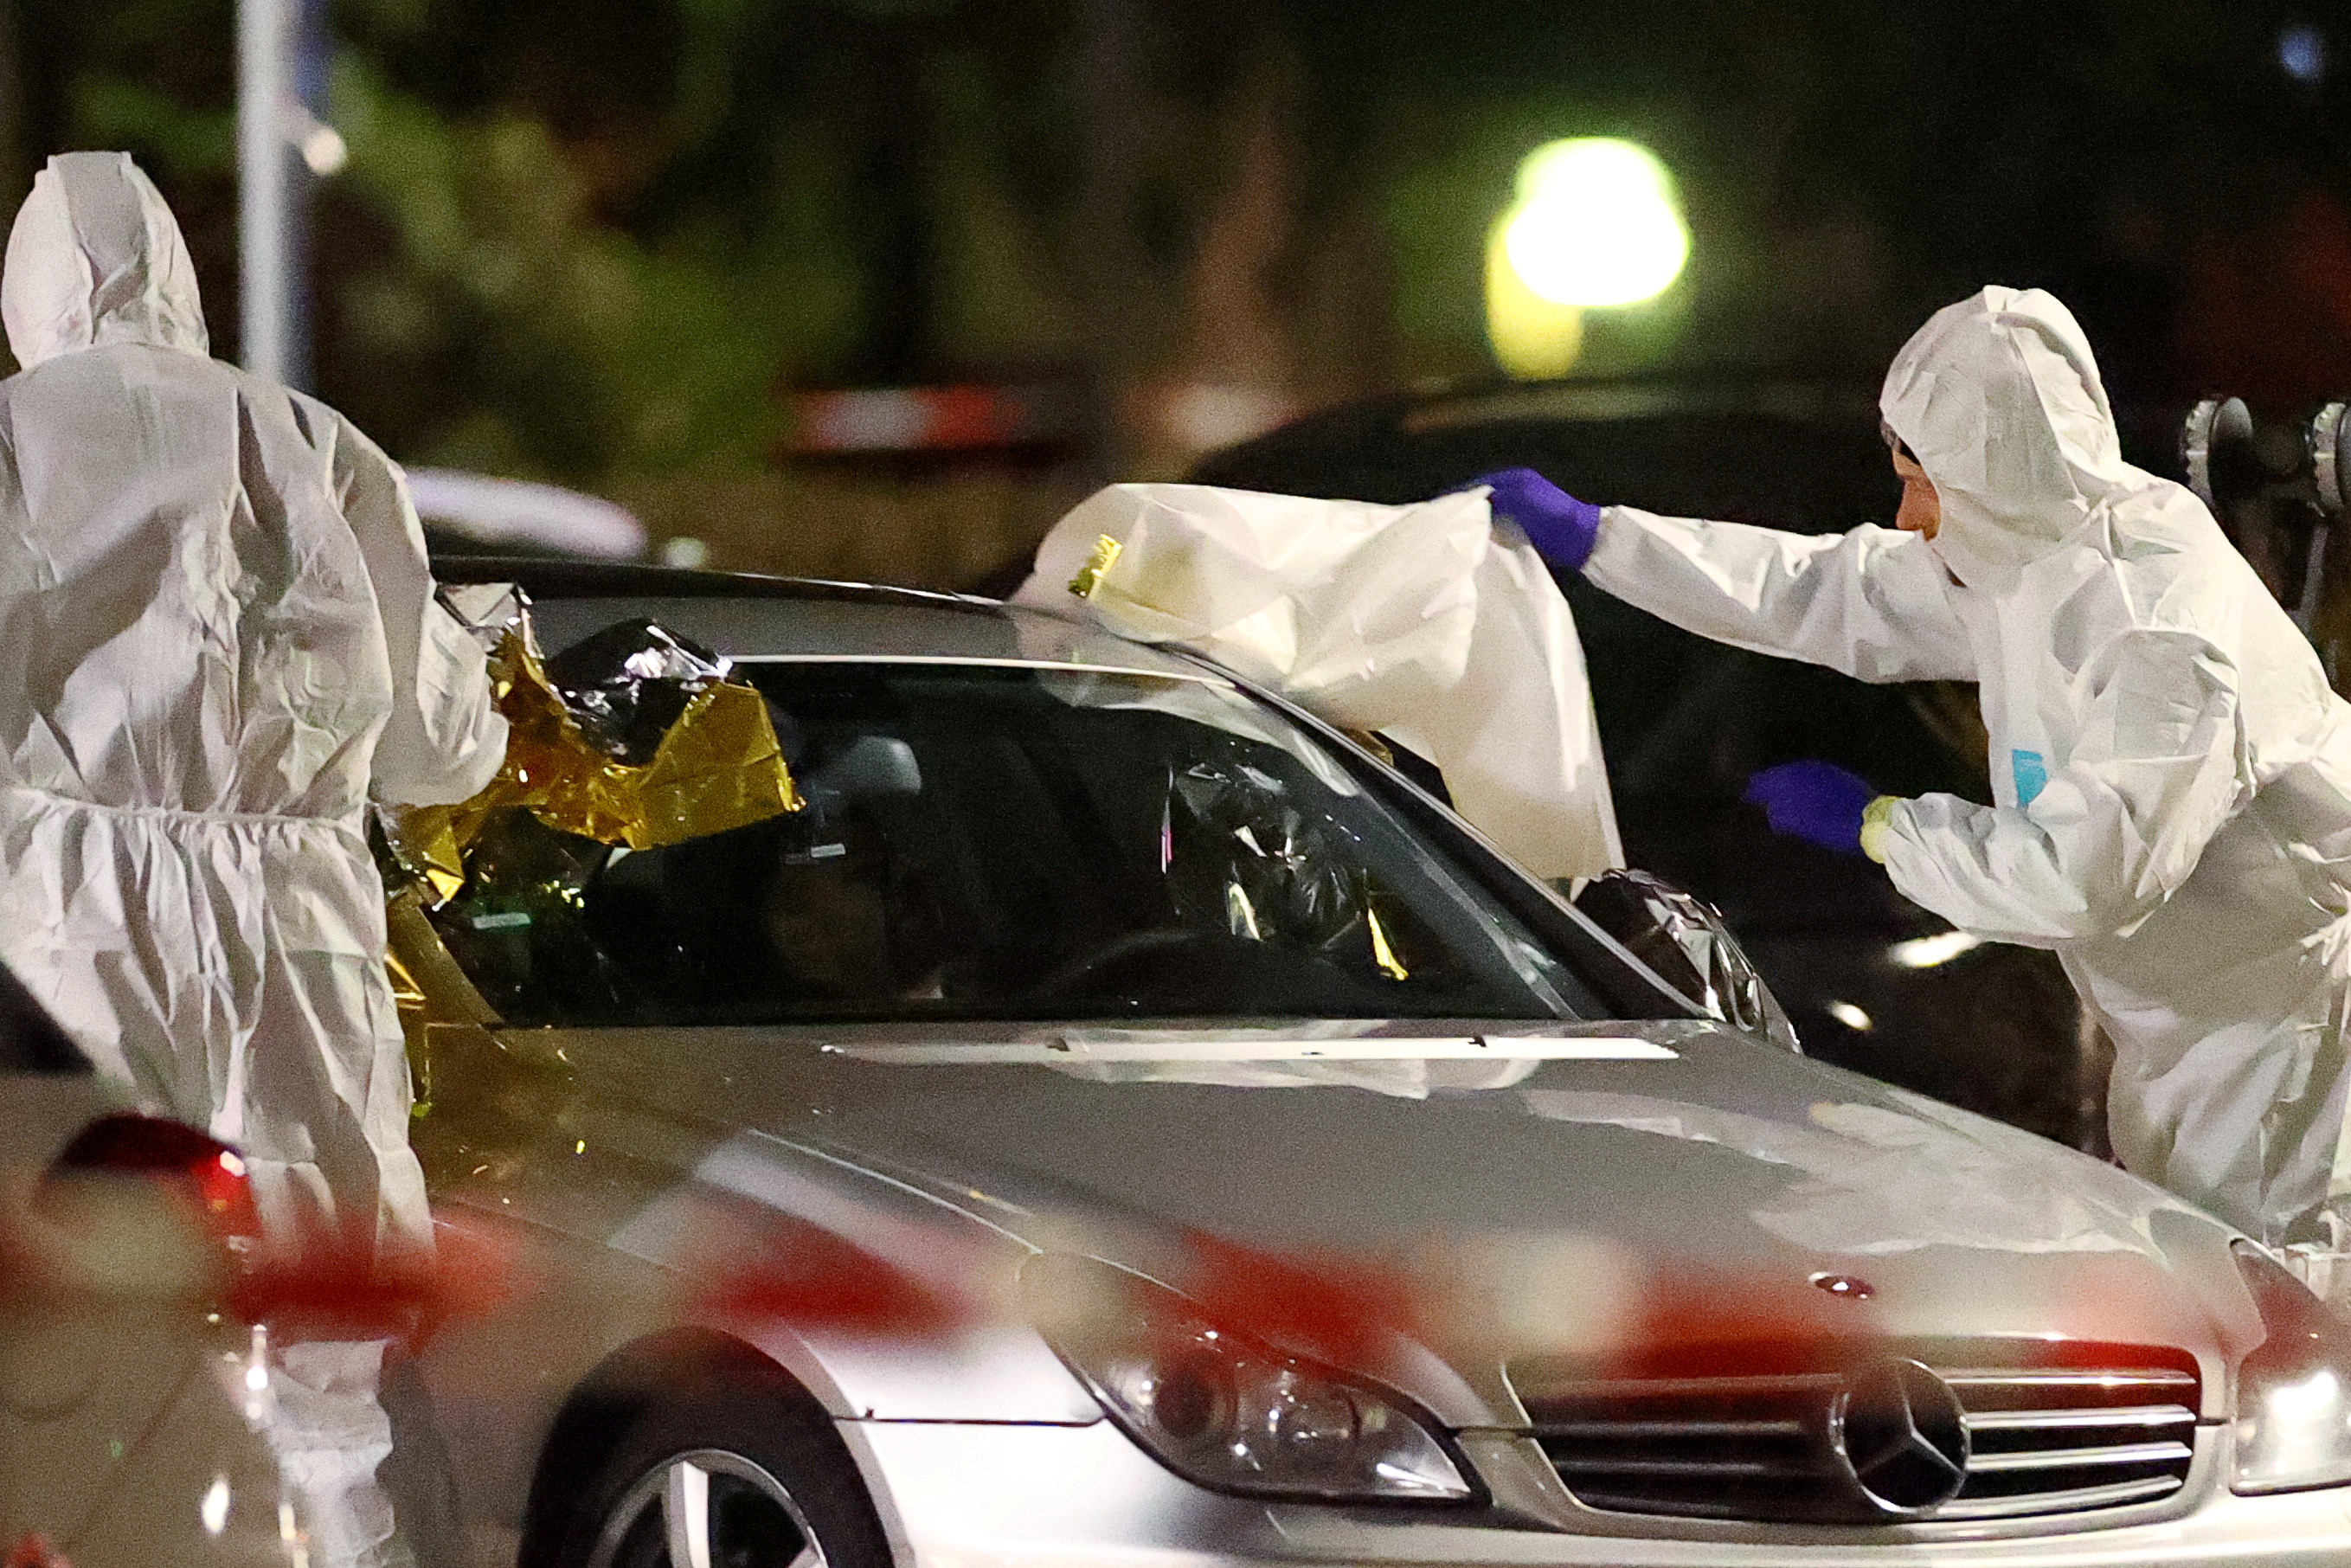  Police can be seen examining a silver Mercedes where the shooting unfolded